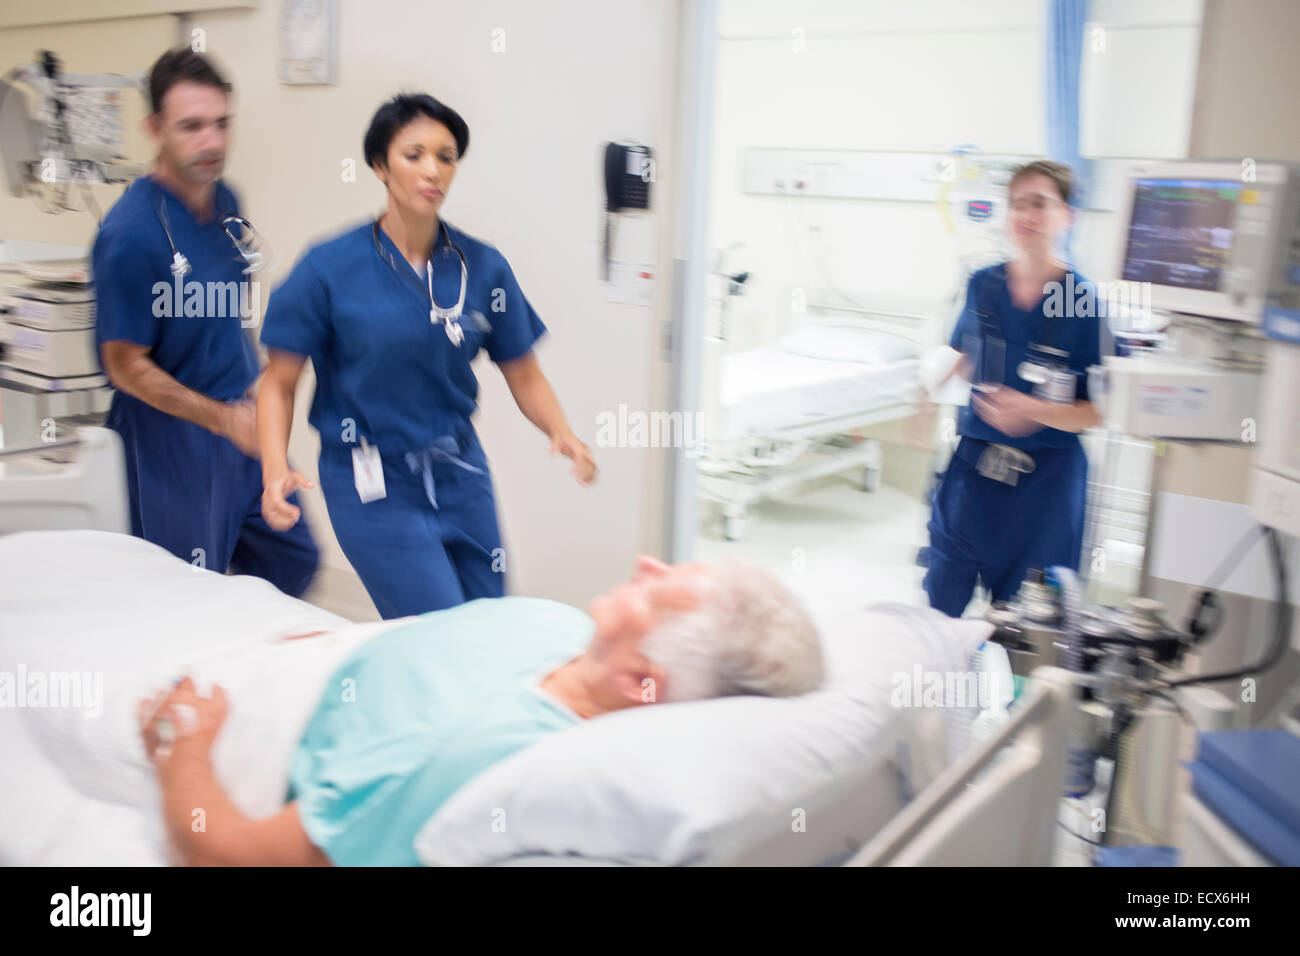 Doctors rushing to rescue patient in hospital Stock Photo